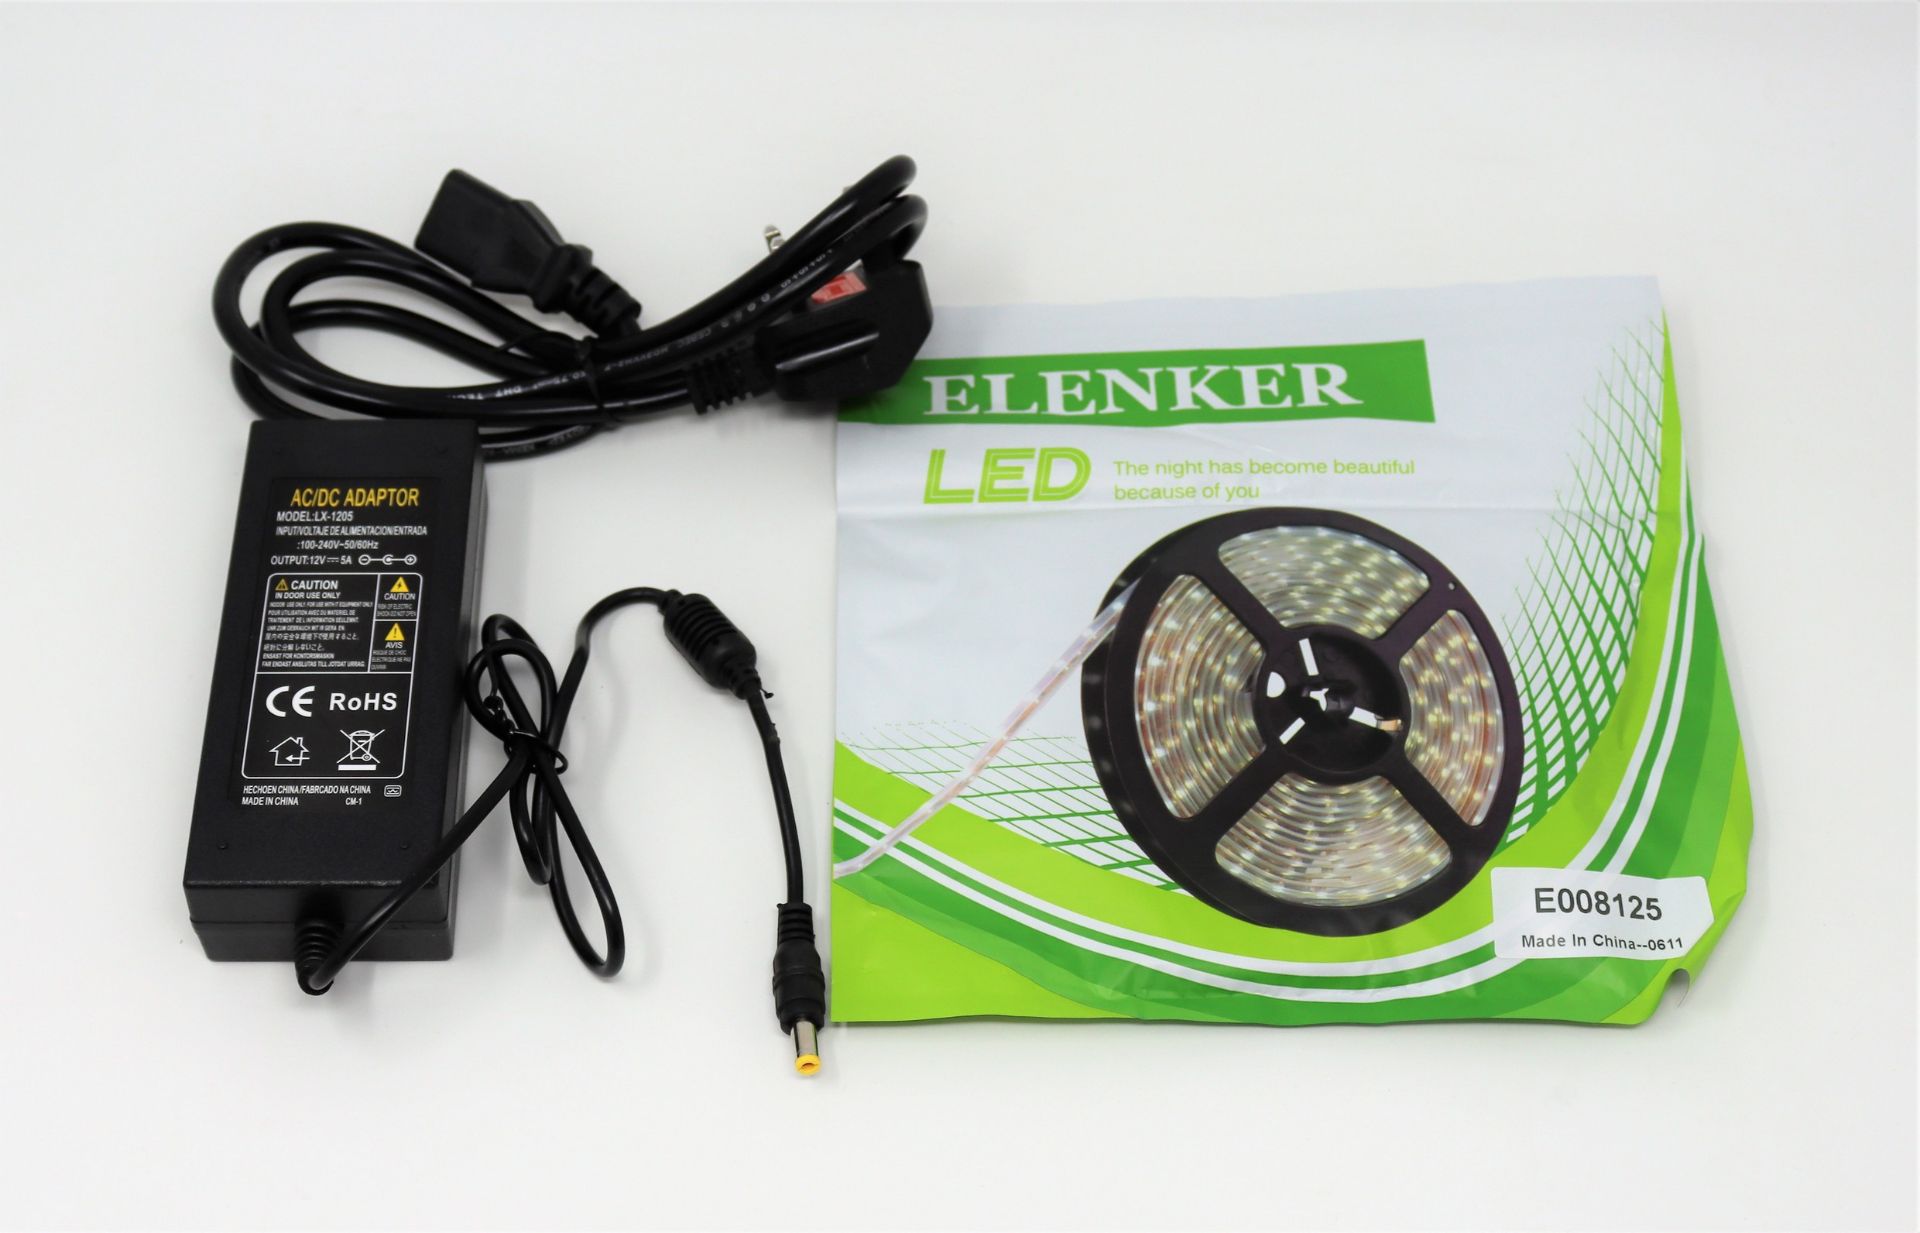 COLLECTION ONLY: A quantity of as new Elenker LED strips and UK power supplies (Two boxes).